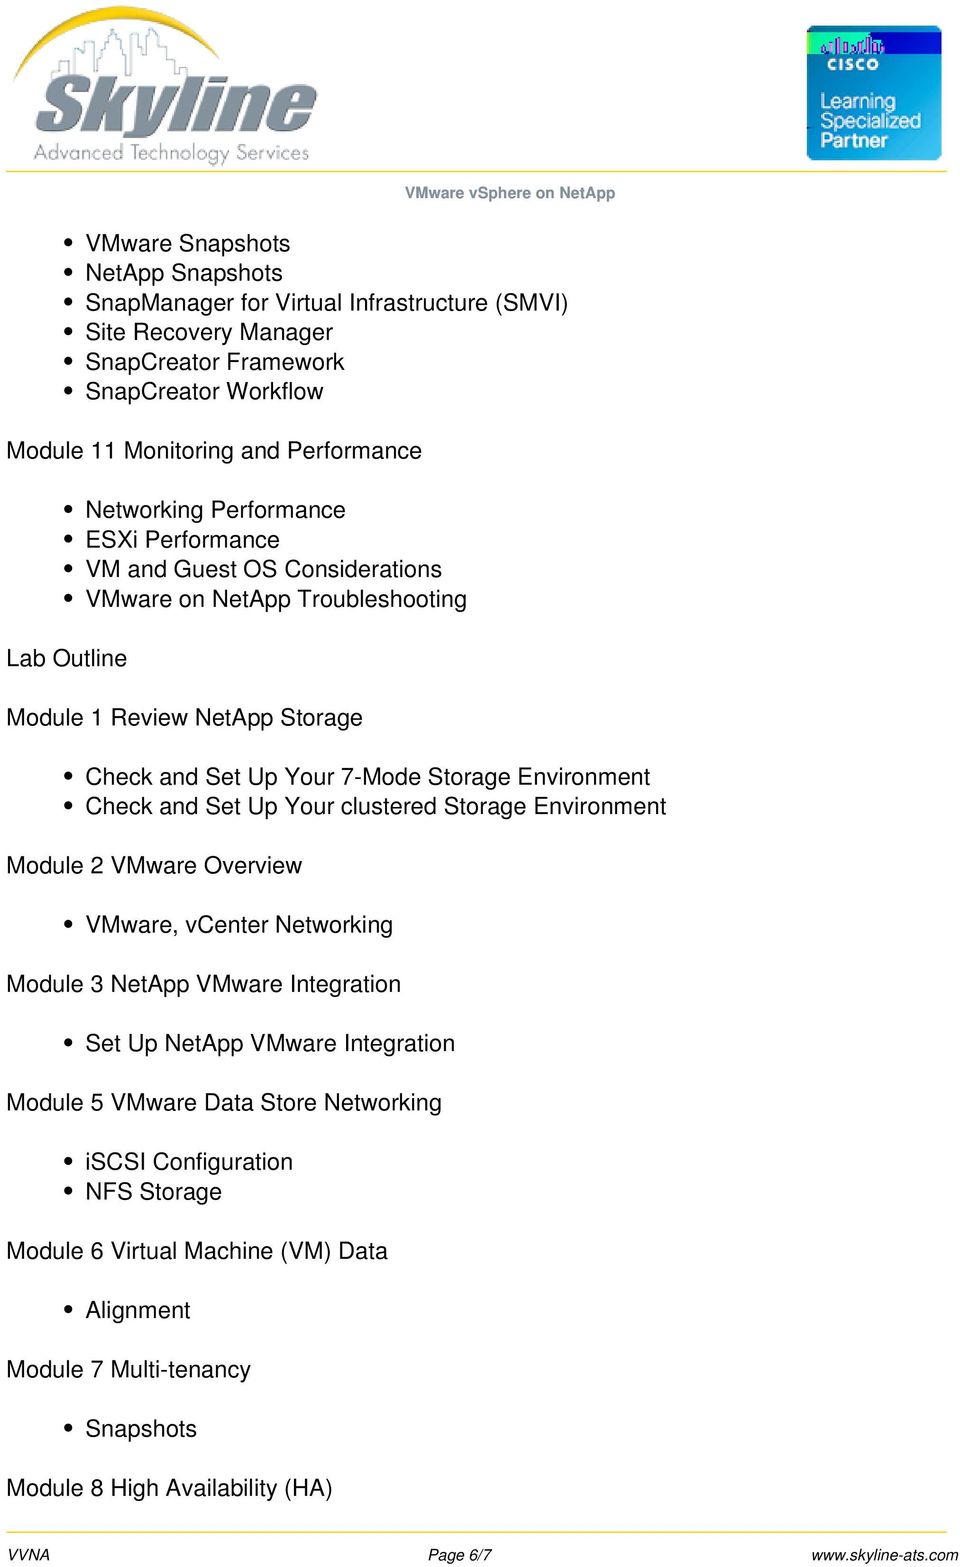 Environment Check and Set Up Your clustered Storage Environment Module 2 VMware Overview VMware, vcenter Networking Module 3 NetApp VMware Integration Set Up NetApp VMware Integration Module